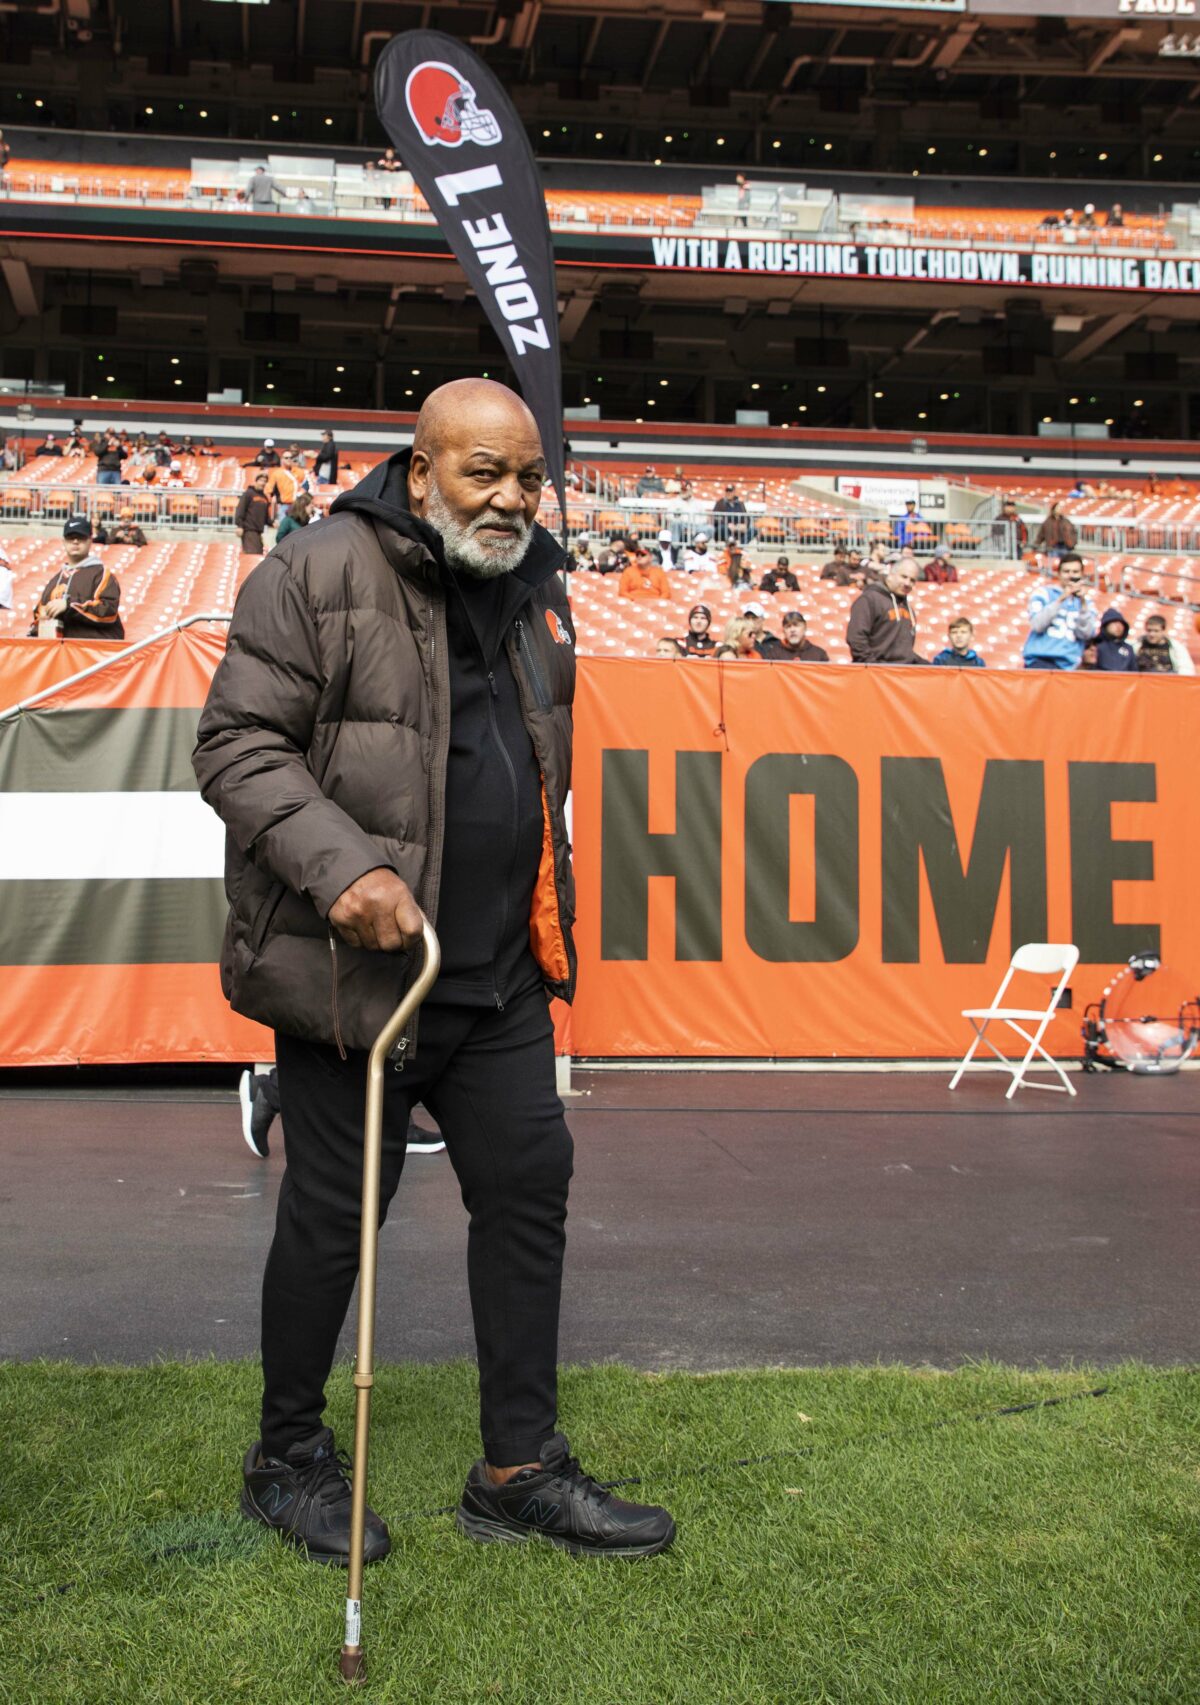 Browns release a statement on the passing of Jim Brown